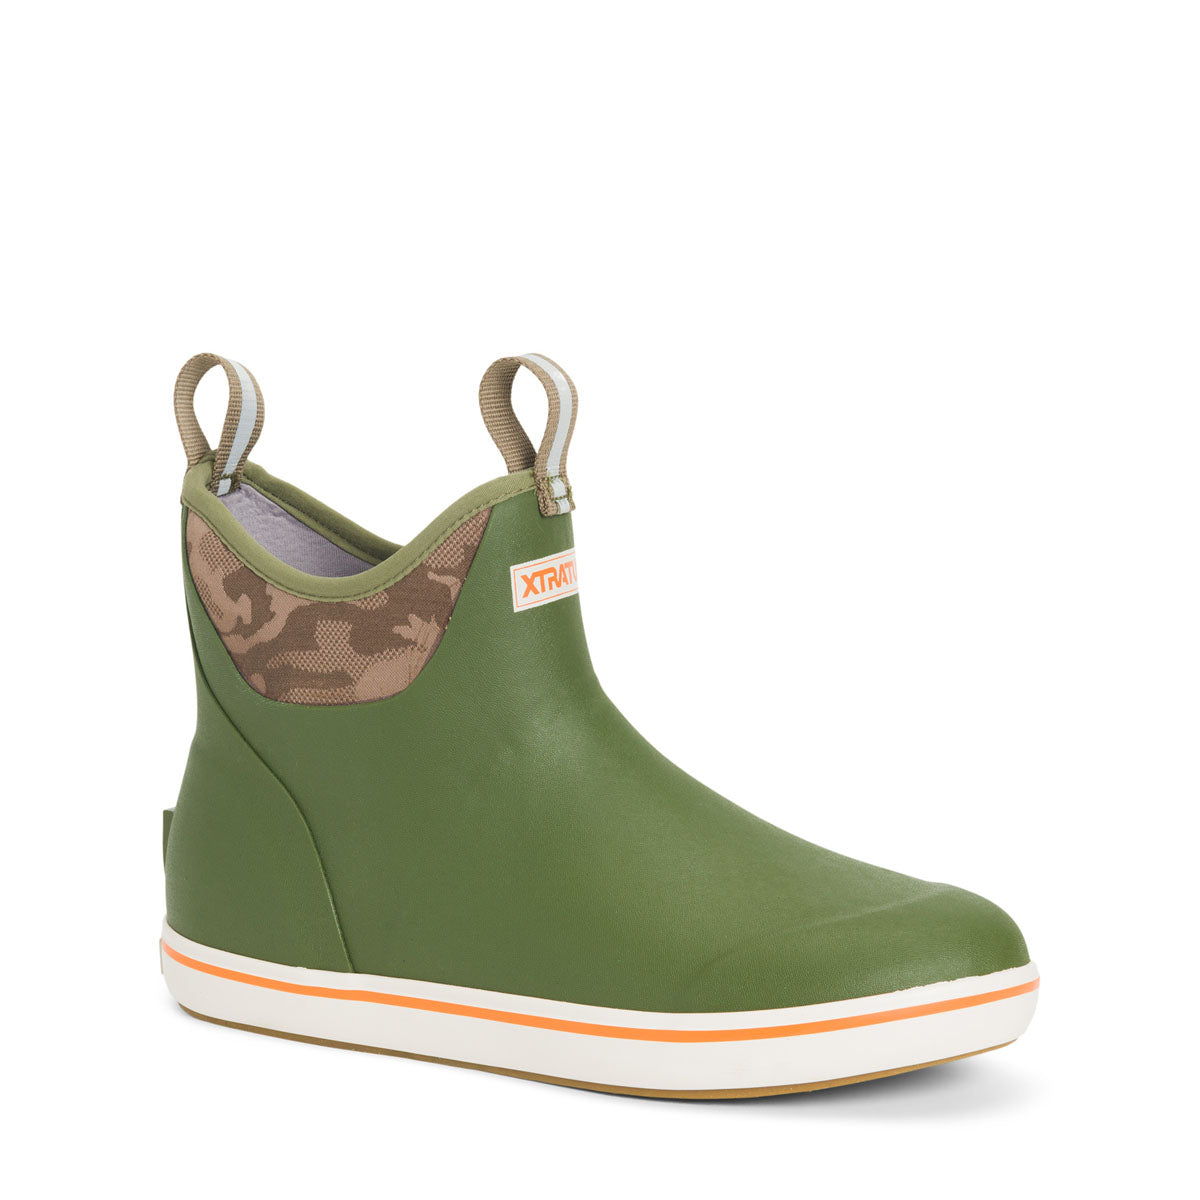 Men's 6 in Leather Ankle Deck Boot